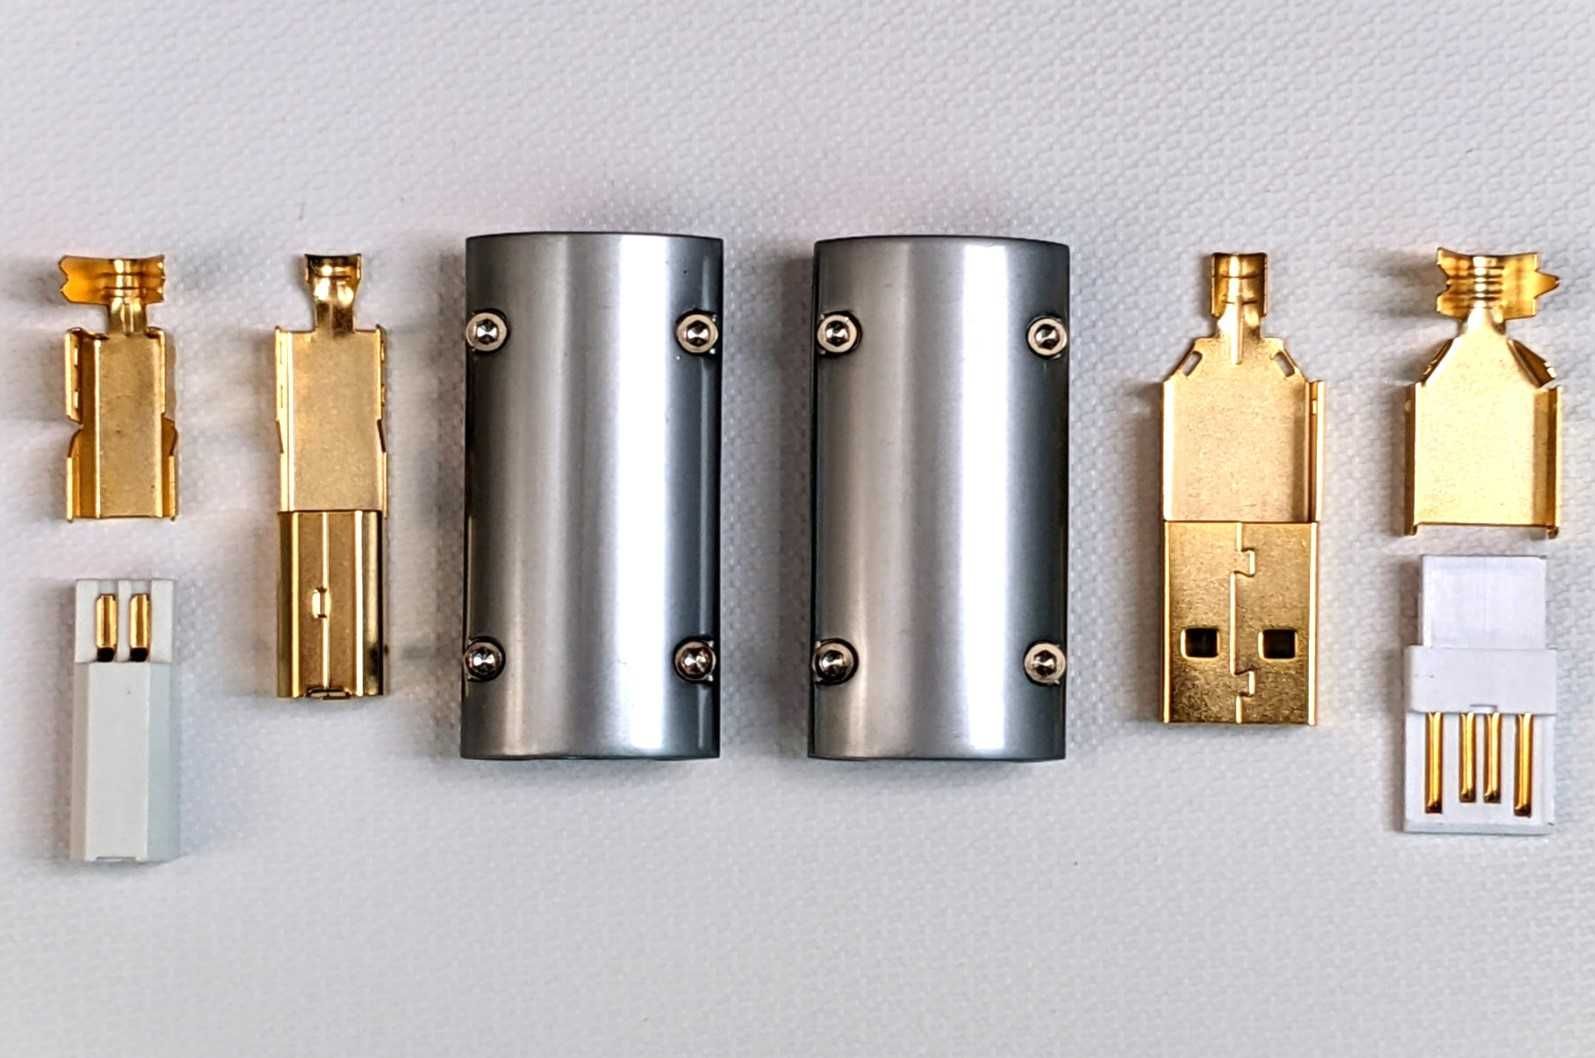 Monosaudio® • A50G/B50G • USB A • USB B • Hi-Fi USB • 24K Gold Plated